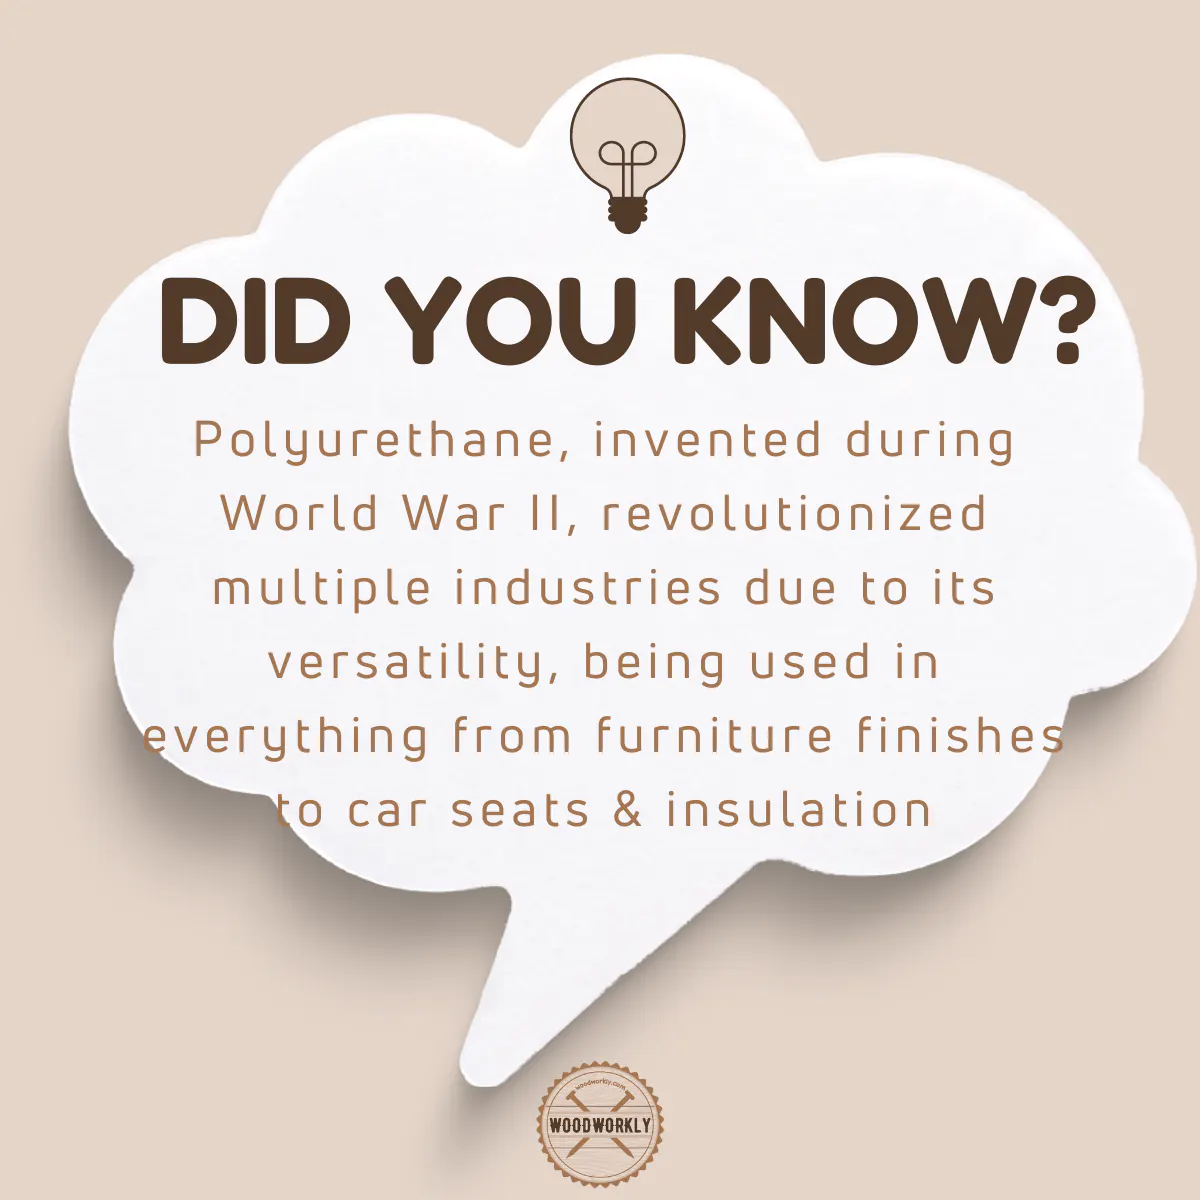 Did you know fact about Polyurethane